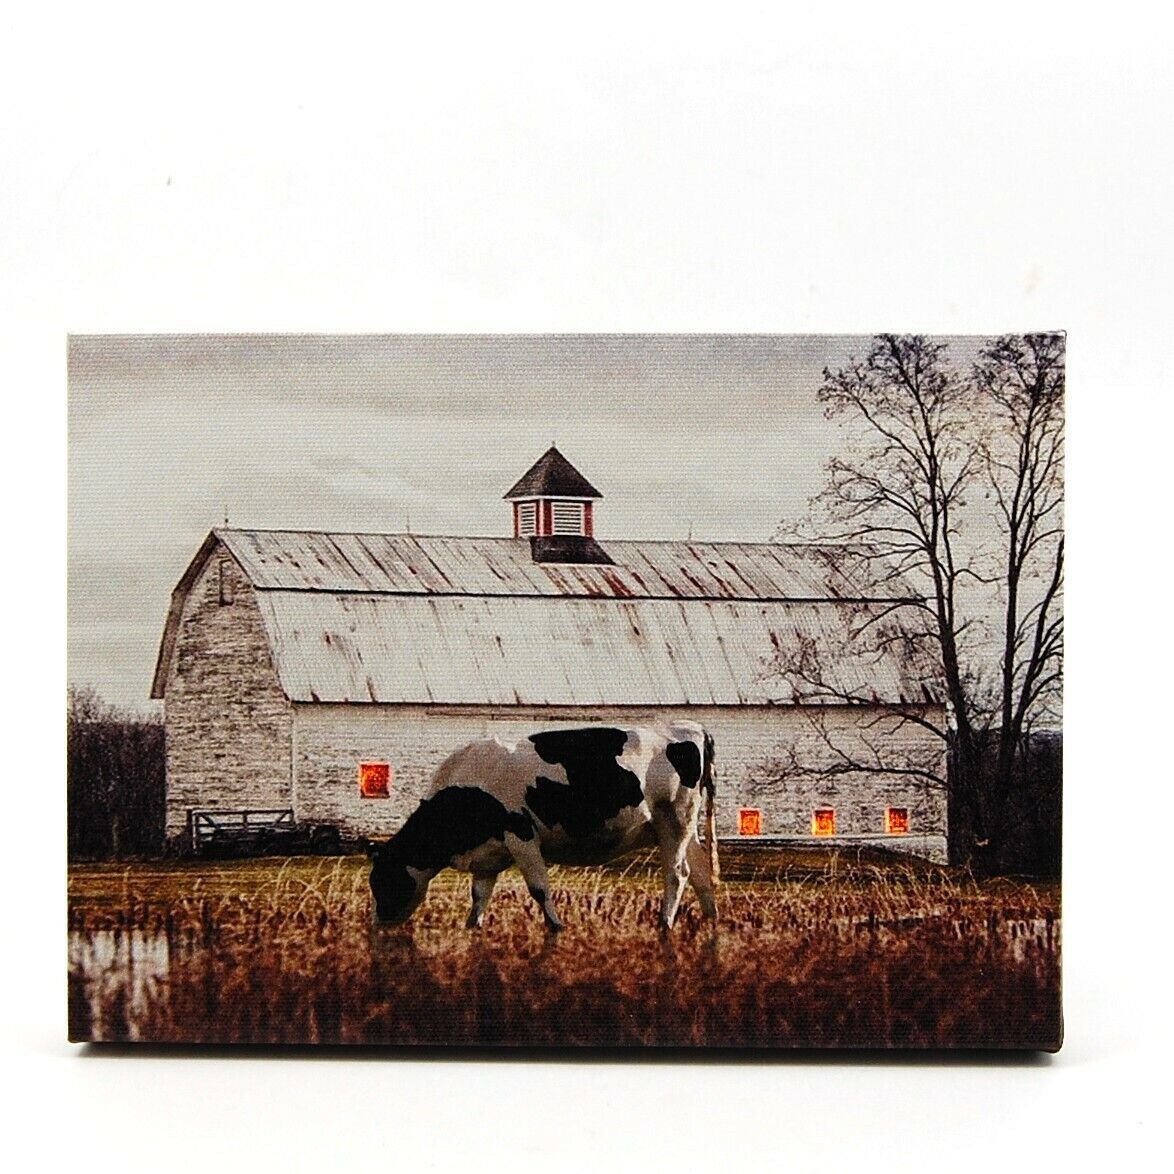 White Barn Country Farm LED Light Up Lighted Canvas Wall Art or Tabletop Picture - $20.89